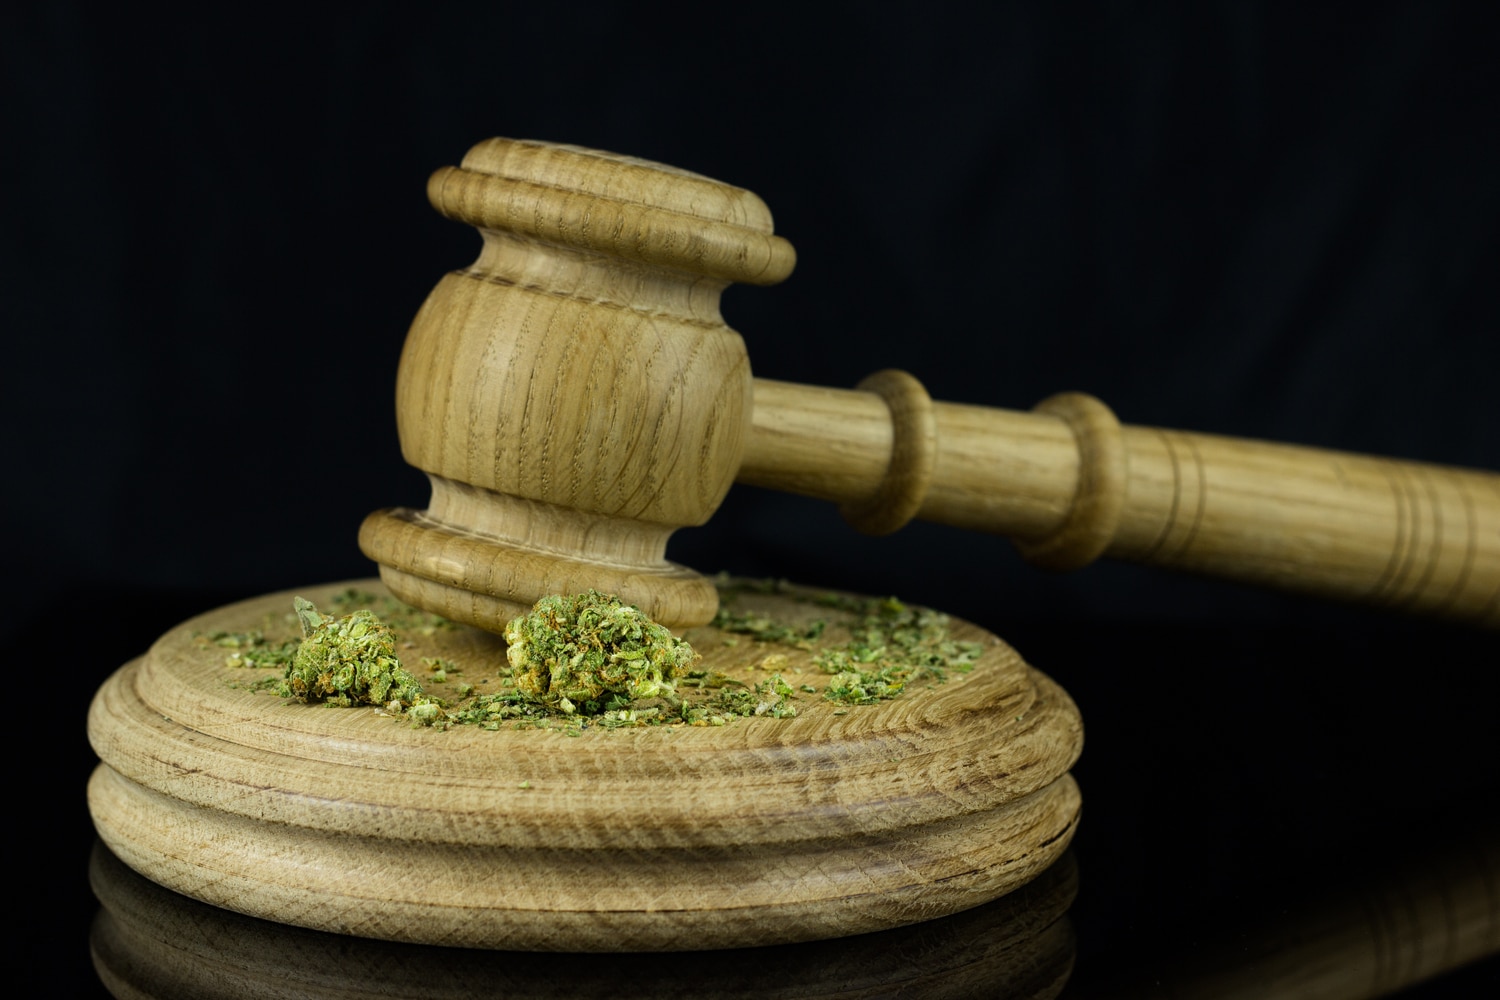 Cannabis and the law